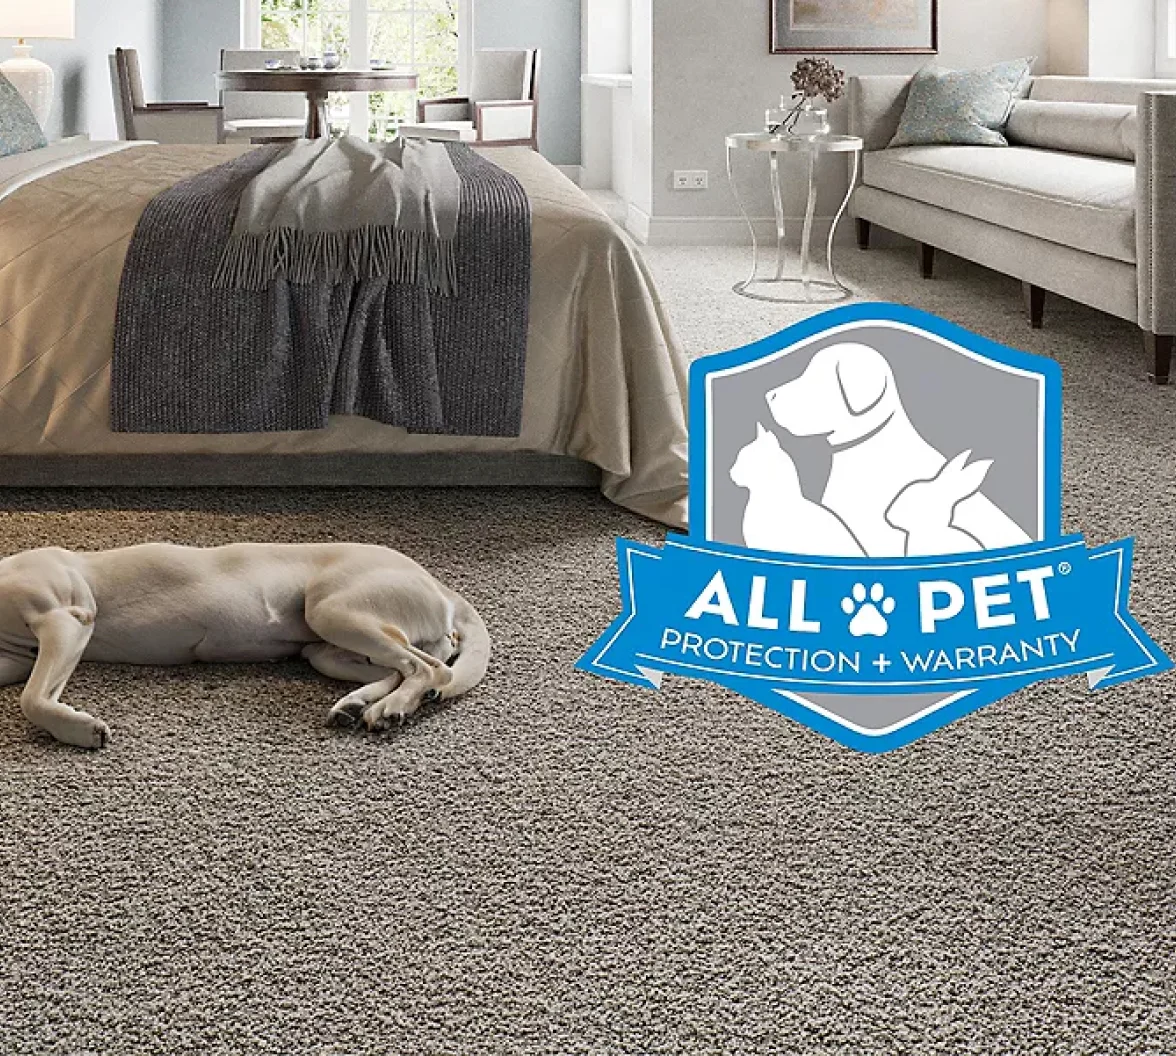 All Pet® is backed by our Pet® Protection & Warranty